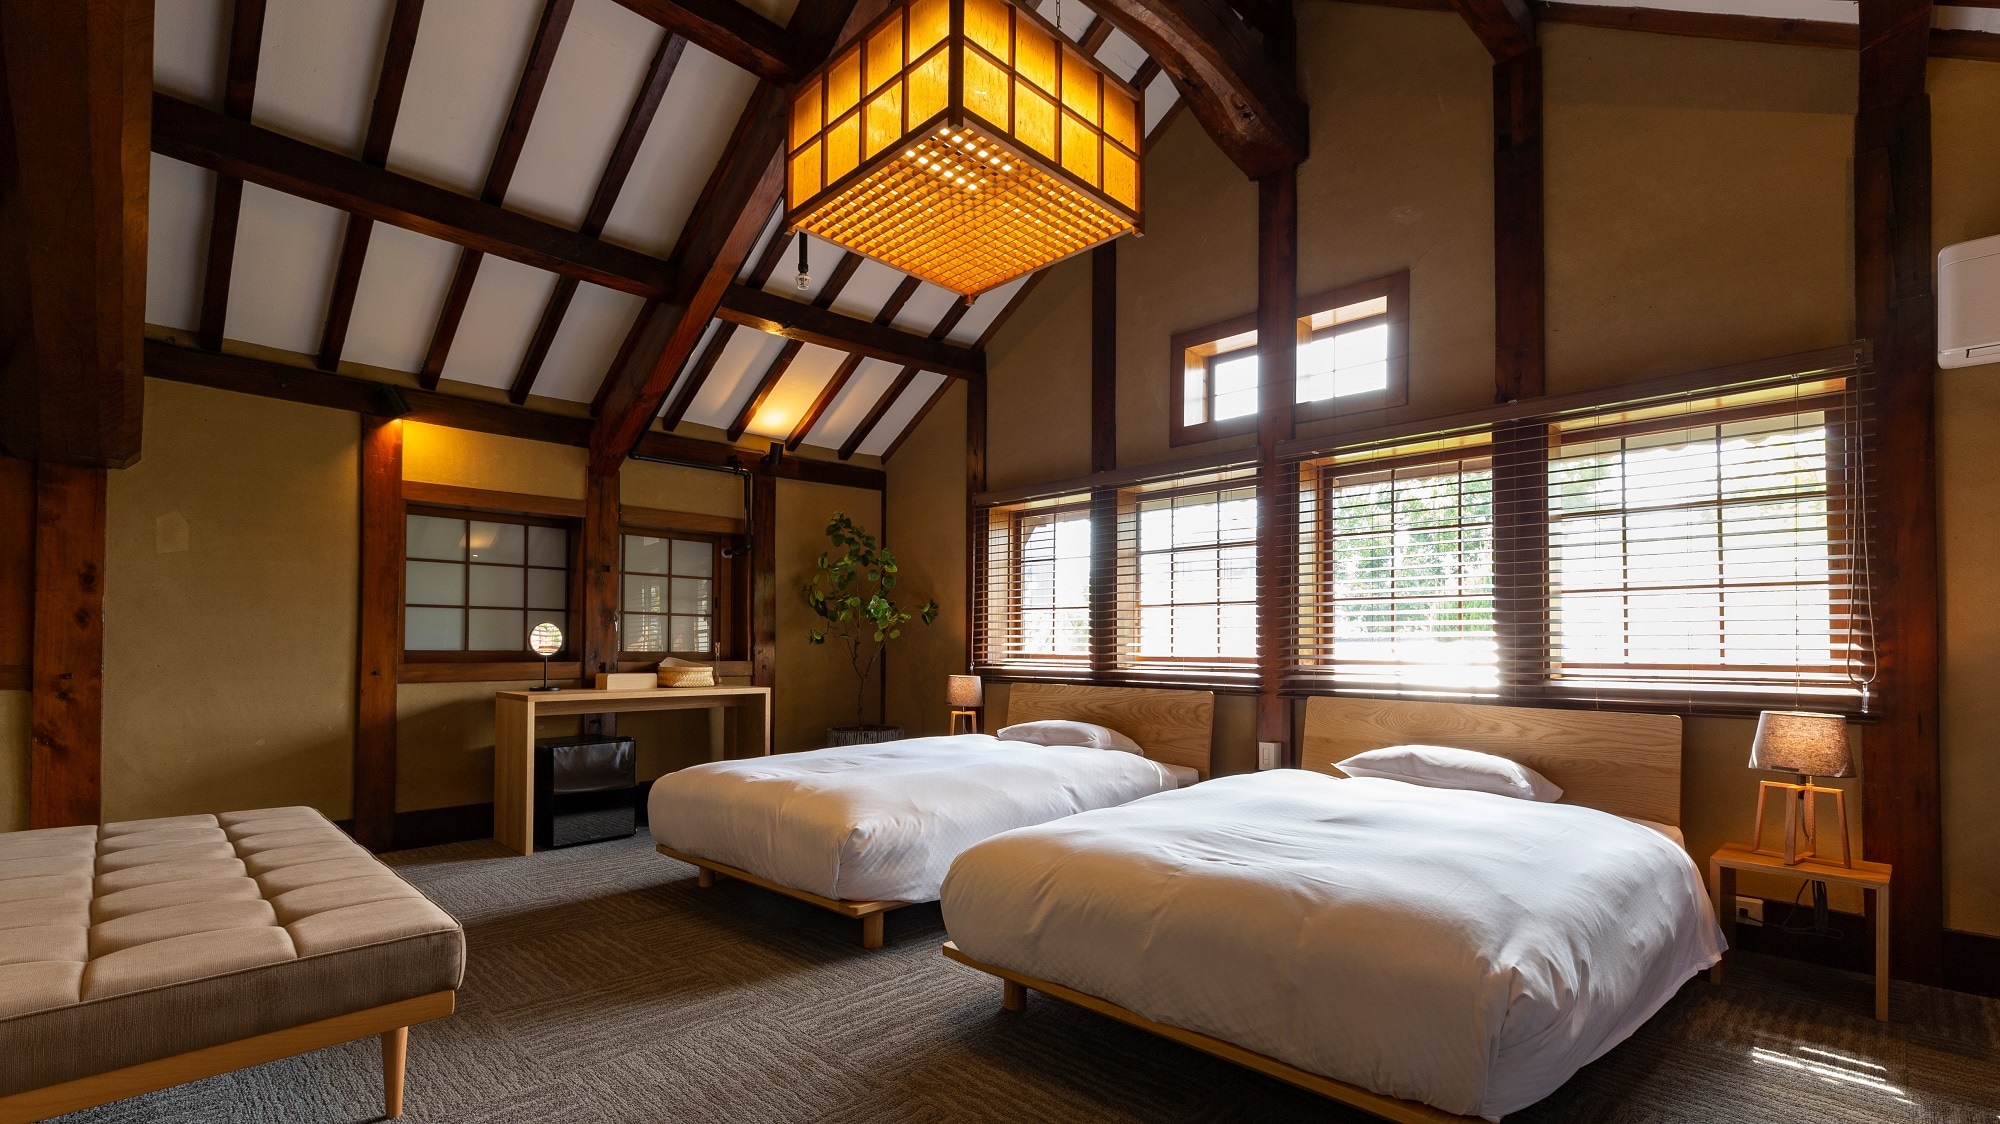 [VMG Grand 105] A sunny room with a view of the trees in the garden and the old roof tiles.